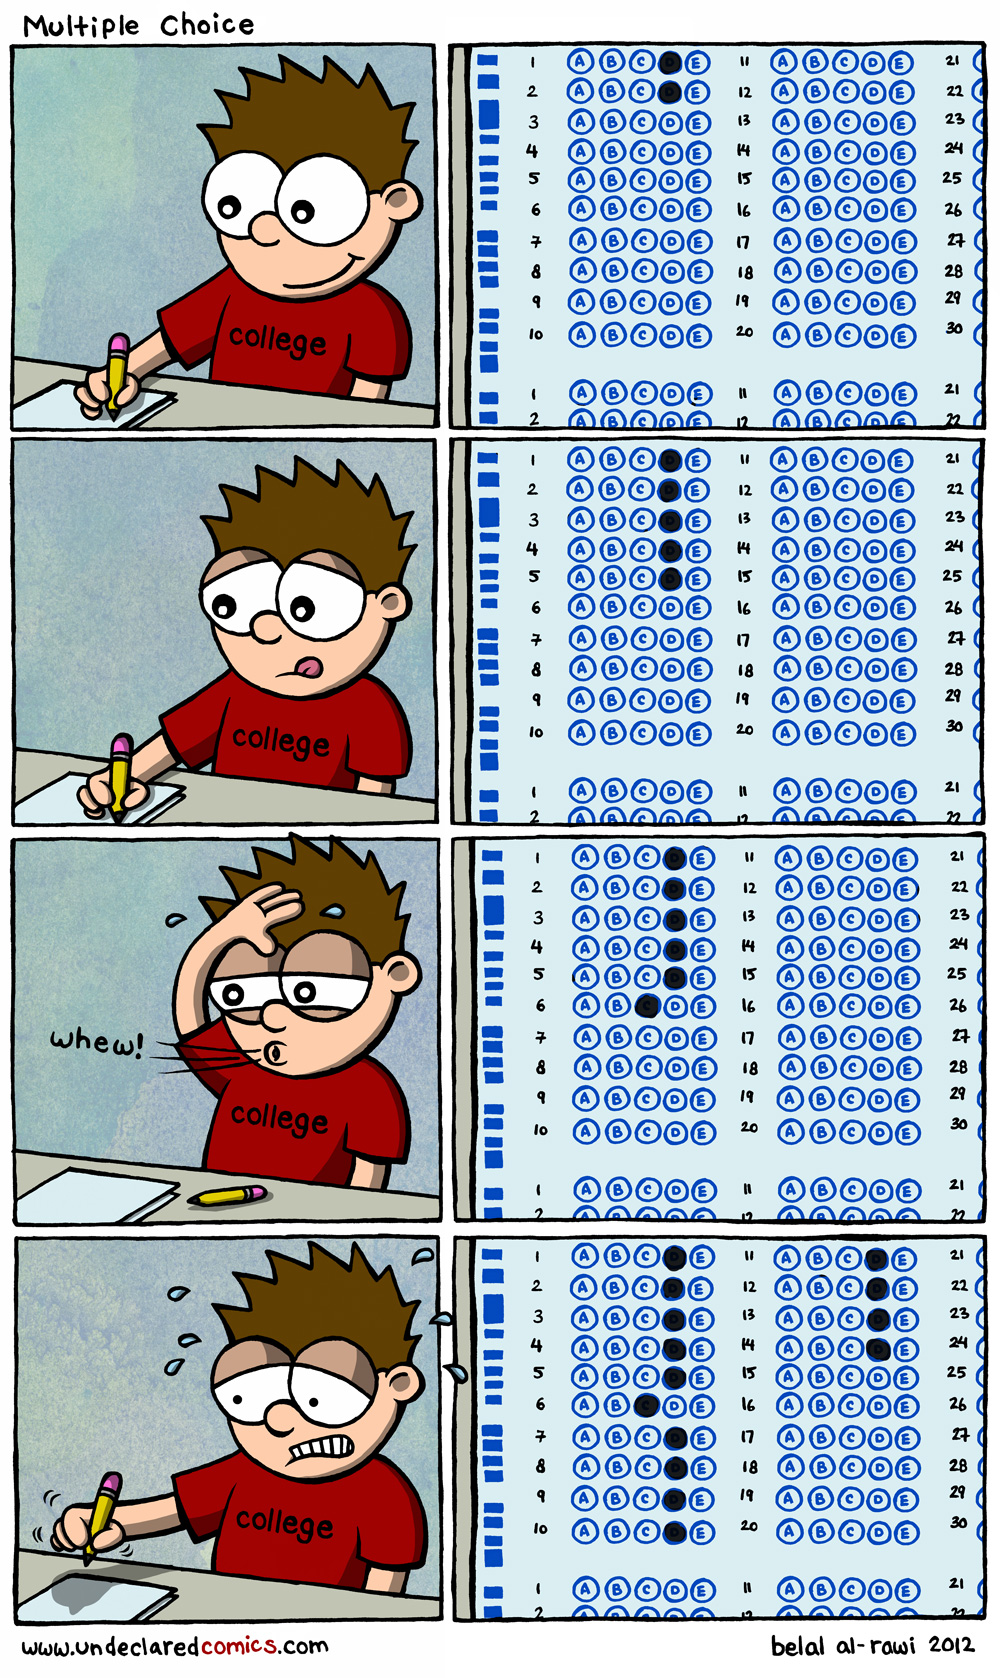 I hate it when this happens on a test!